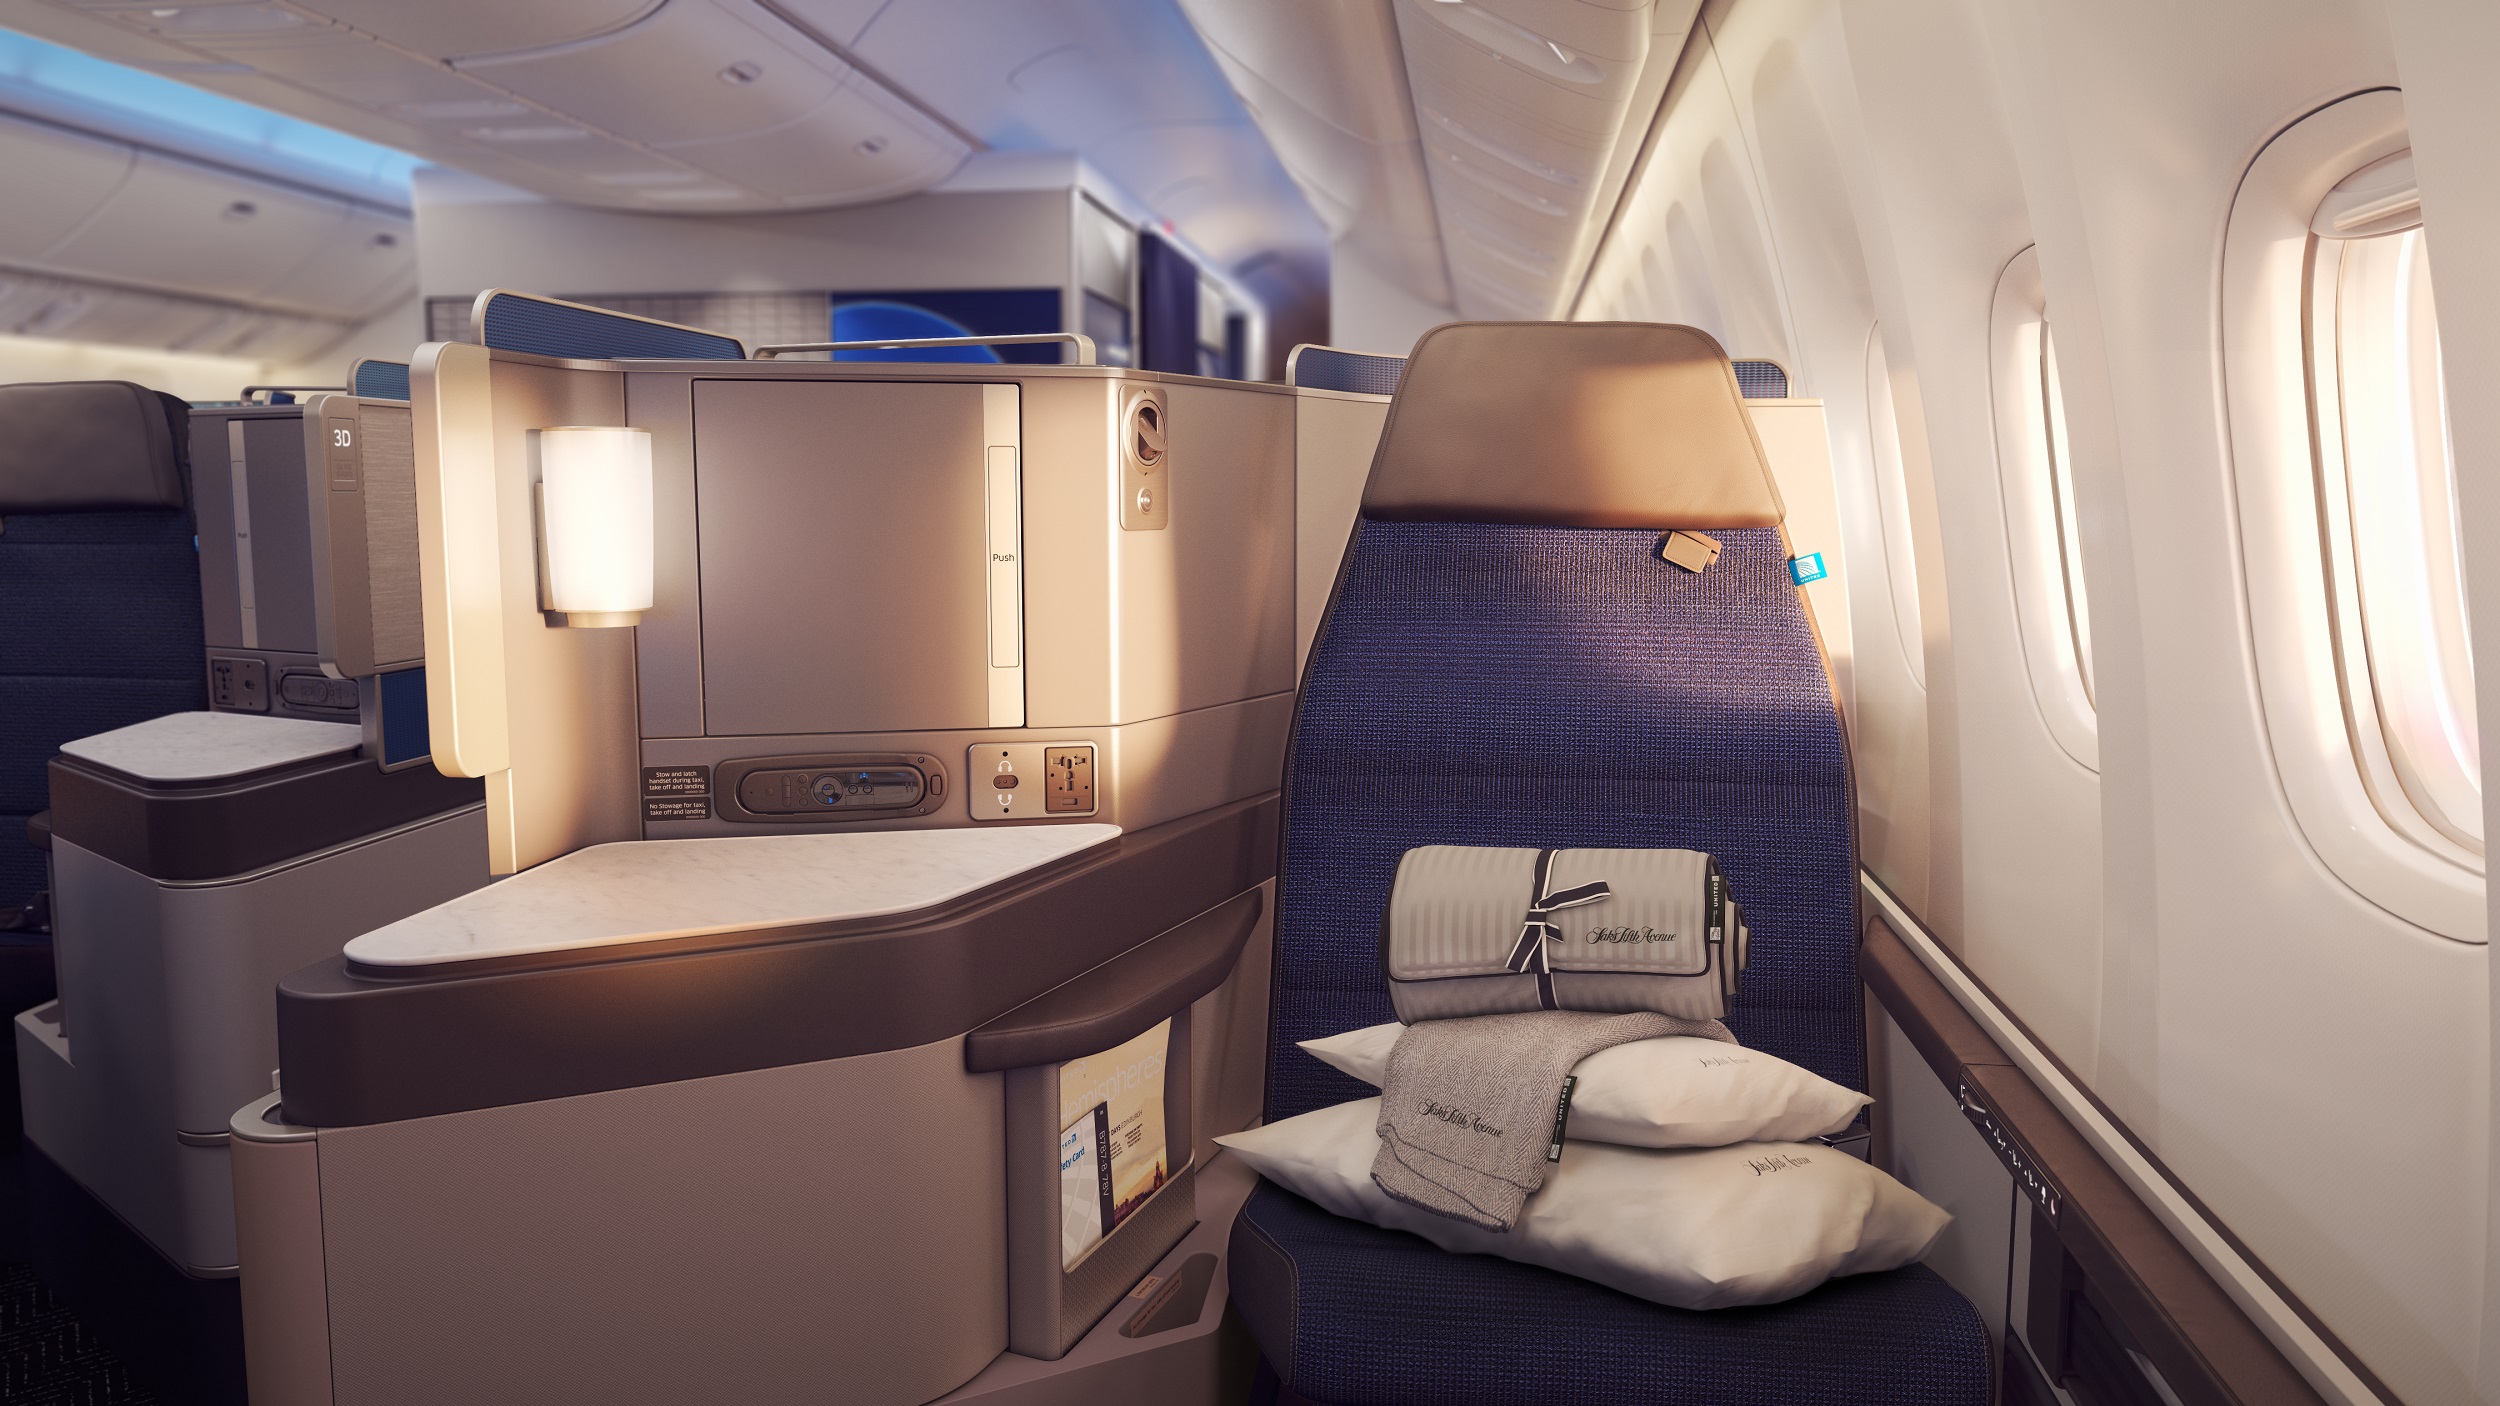 United Polaris is United's new take on the International Business Class. Source: United